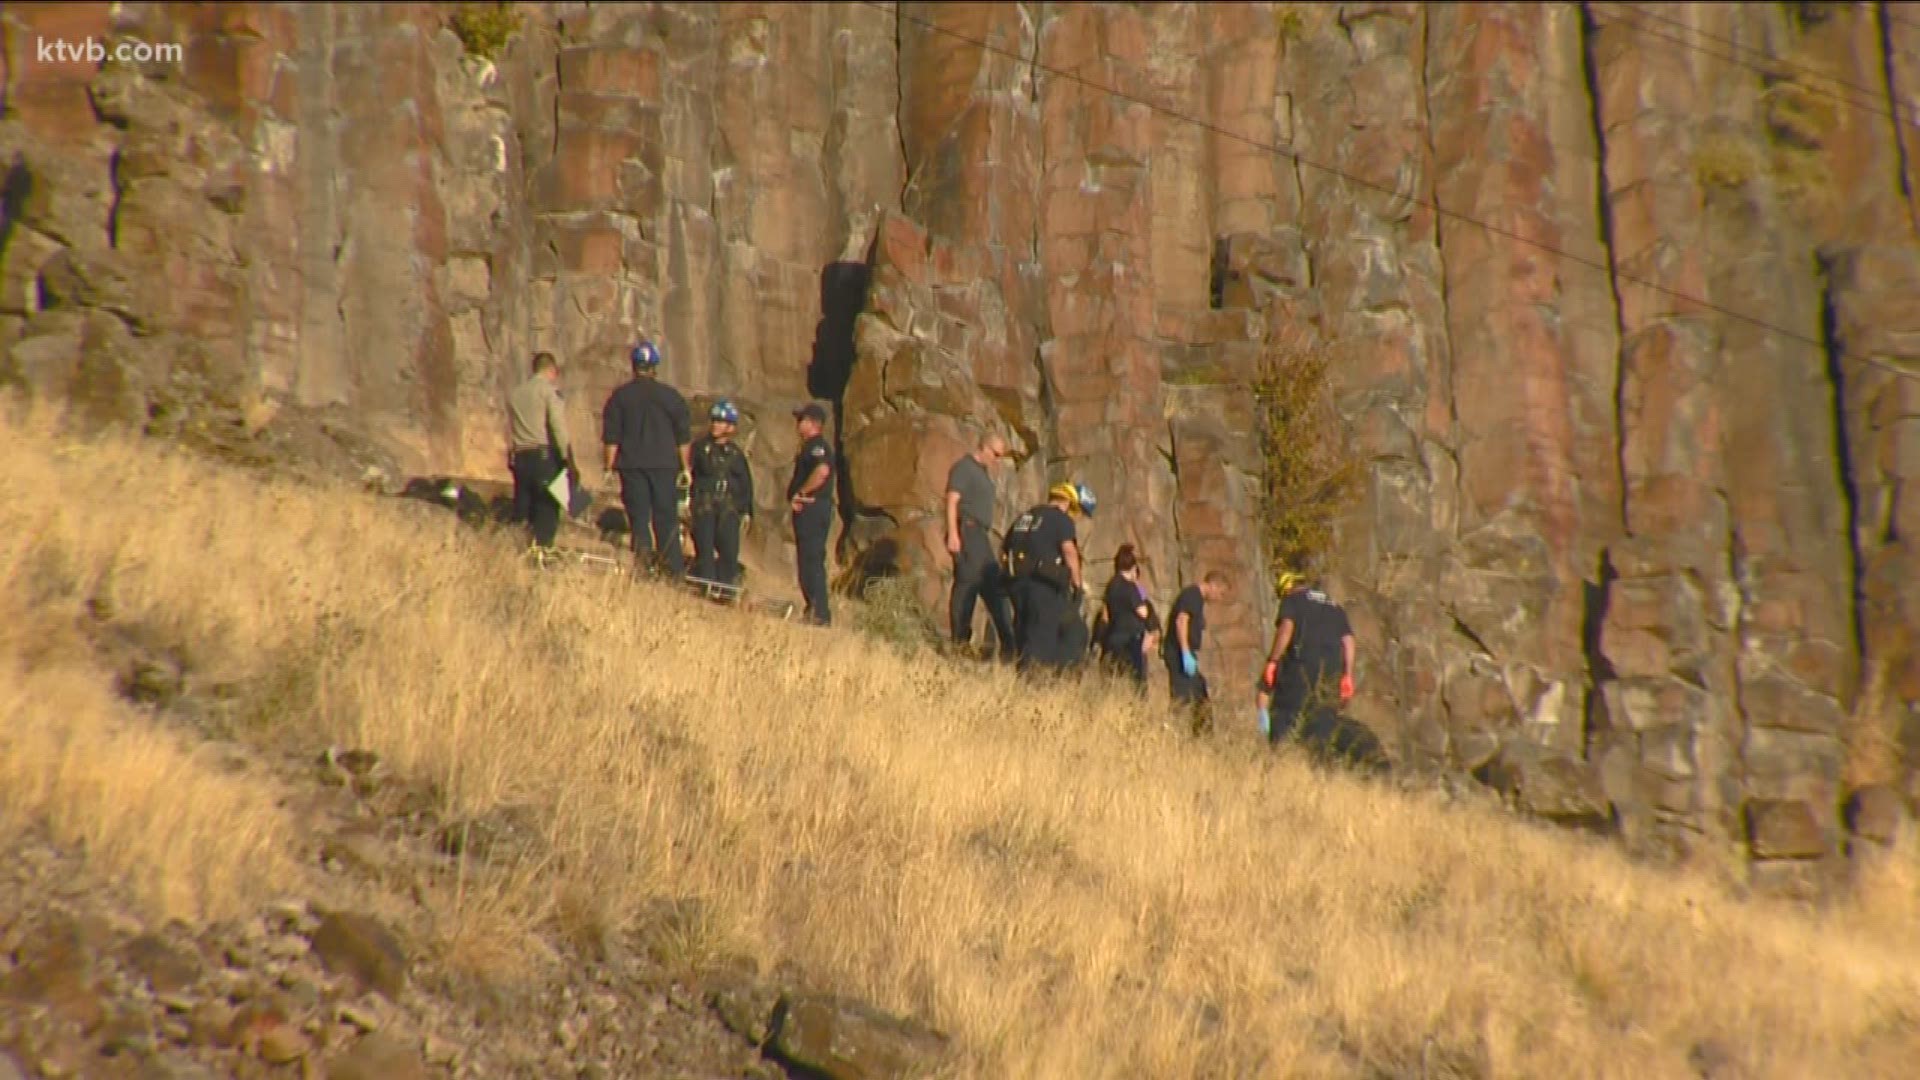 The Ada County Sheriff's Office says the man experienced some kind of equipment failure and fell about 40 feet.